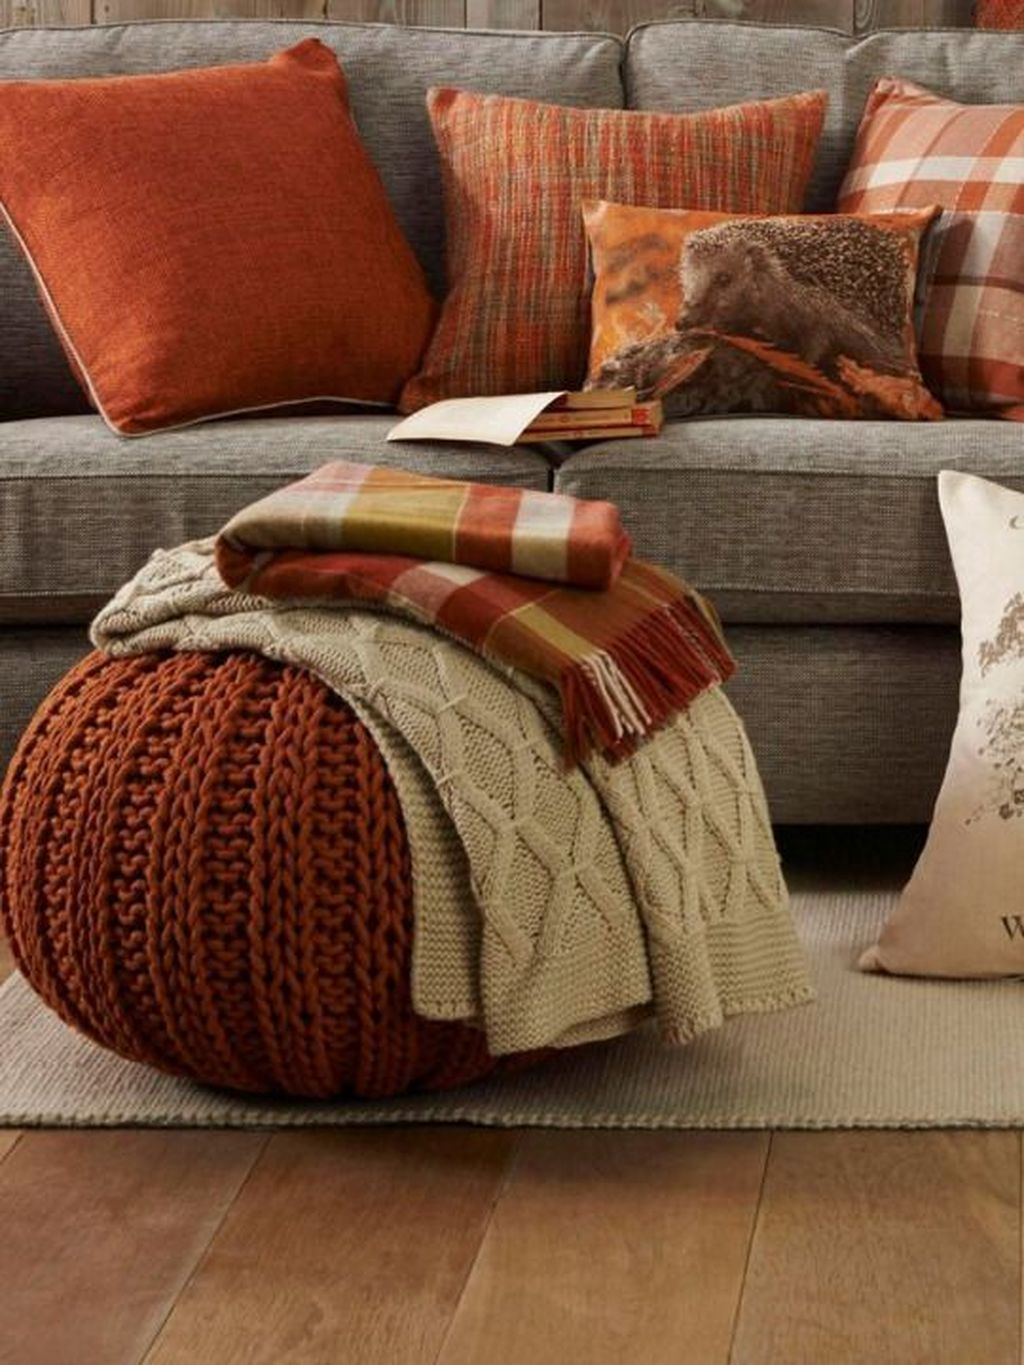 Fabulous Interior Design Ideas For Fall And Winter To Try Now27